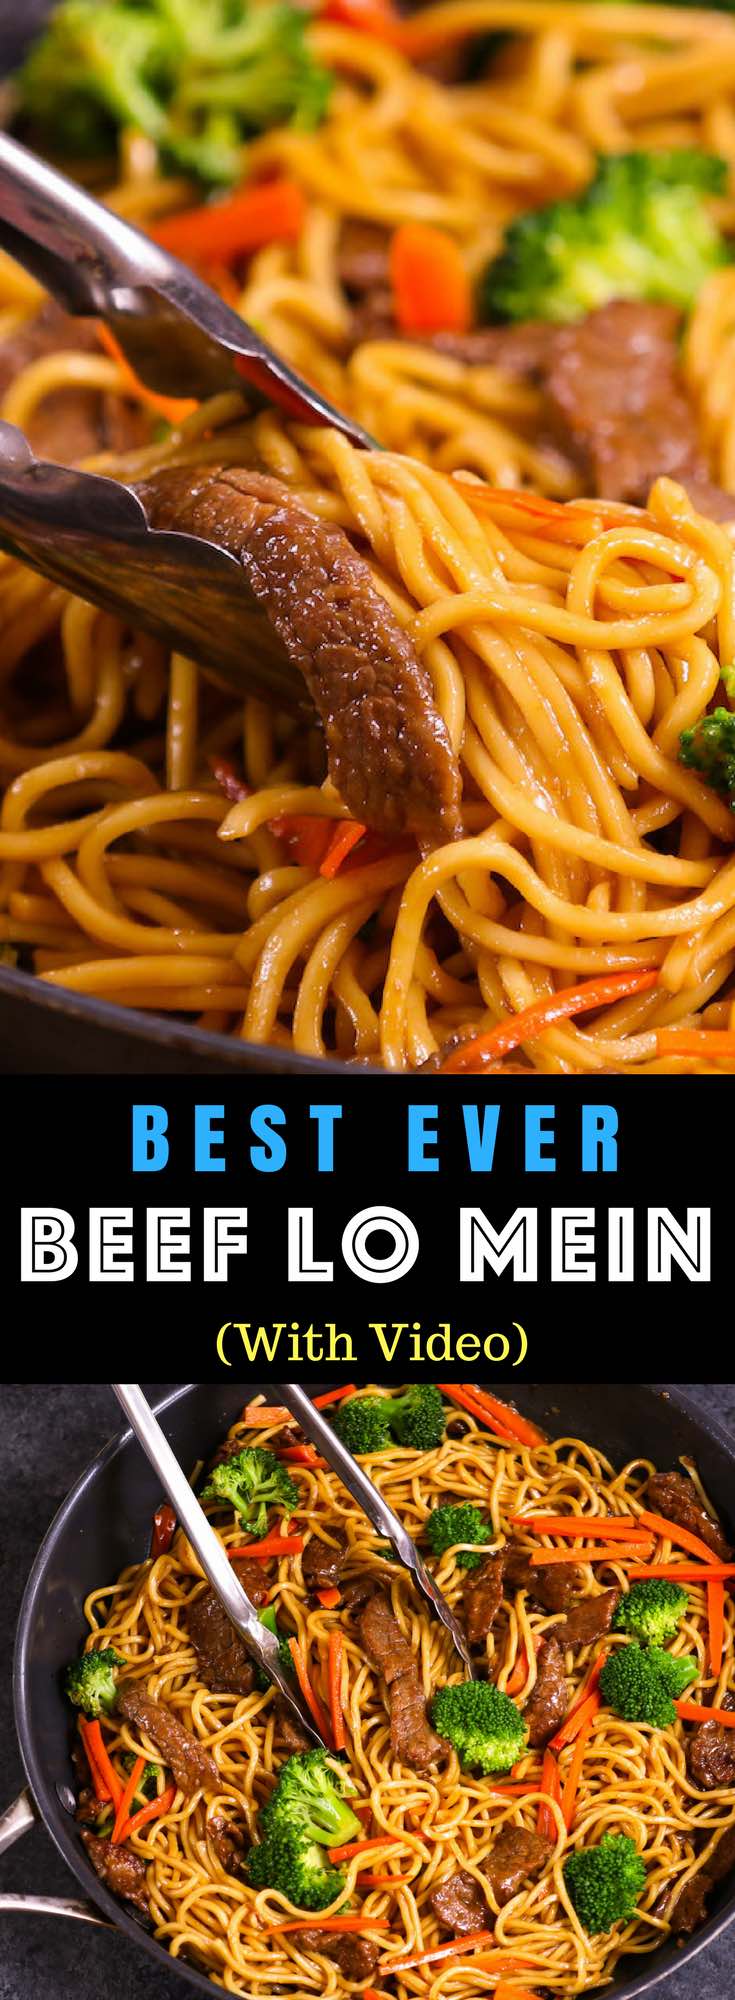 This Garlic Beef Lo Mein is a quick and easy version of classic Chinese dish. It’s so much better than takeout and seriously irresistible with tangy garlic and soy sauce flavors, the perfect weeknight dinner idea you can make in 20 minutes! All you need is only a few ingredients: flank steak, lo mein noodles, garlic, carrots, broccoli, sesame oil, soy sauce, hoisin sauce, ginger and brown sugar. Video recipe. class=